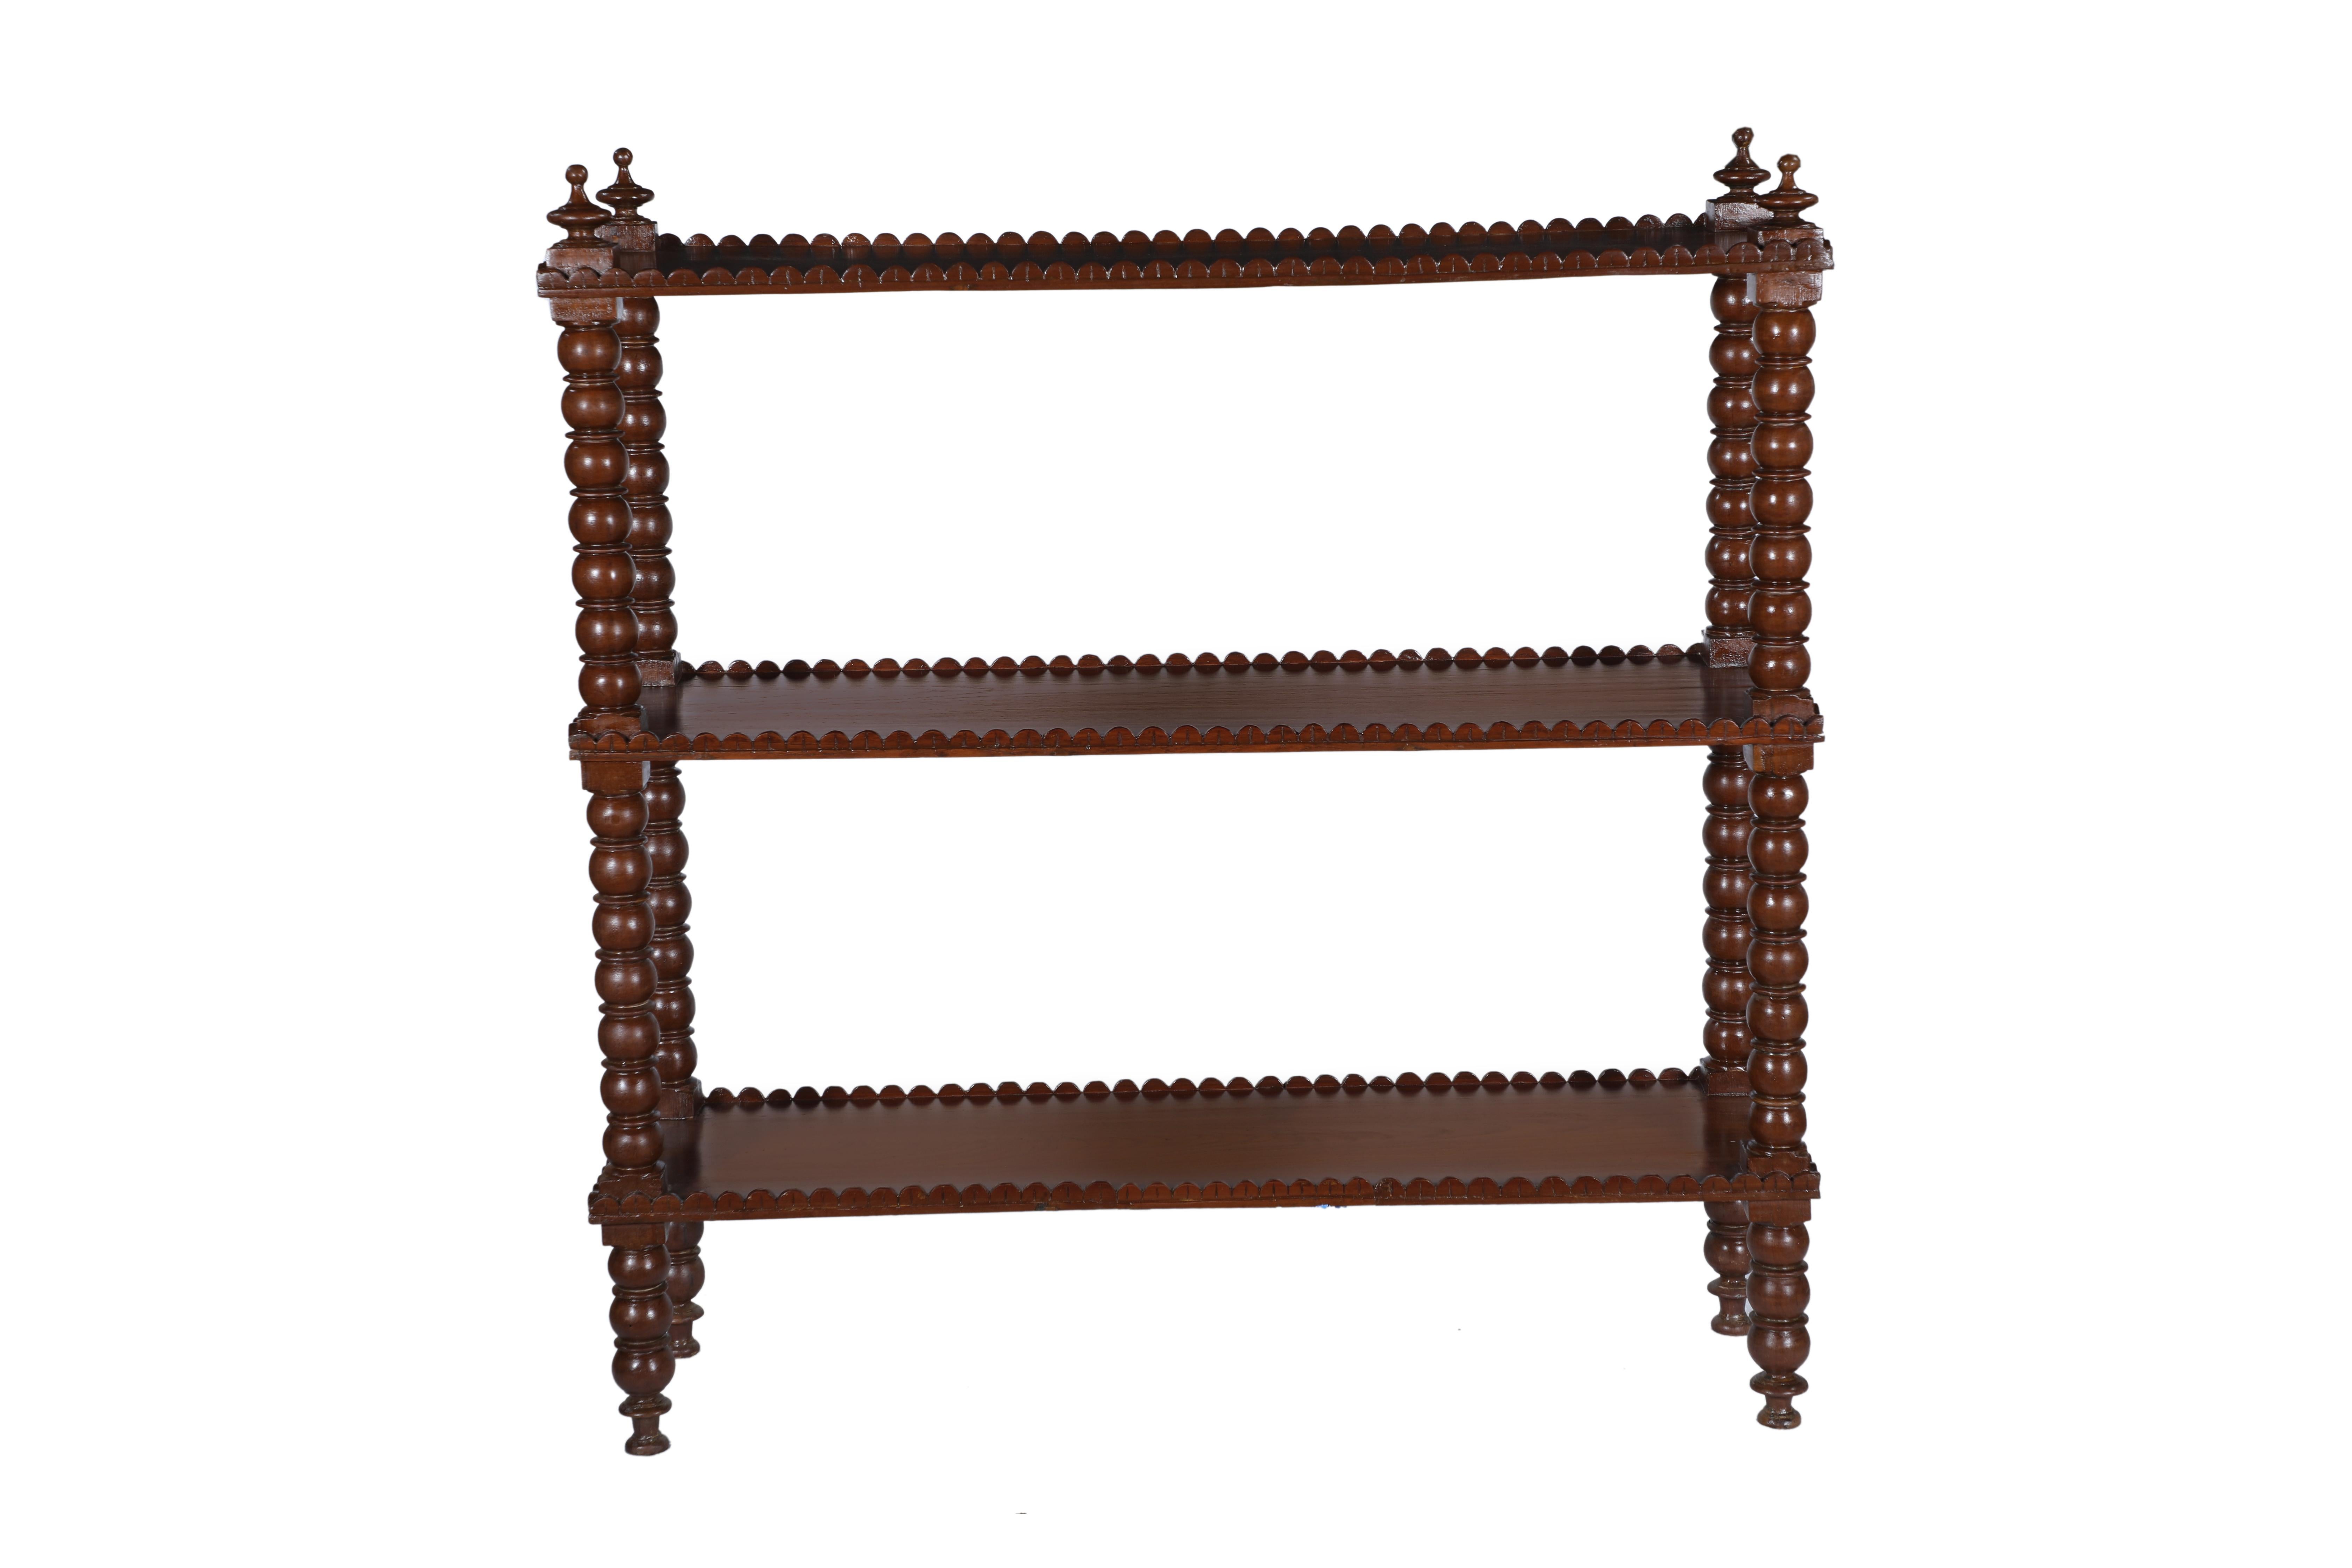 Three-tiered mahogany bookcase shelving with bobbin or spindle sides and finial tops. The shelves all have a scalloped-edged lip. 1950's Colonial British.